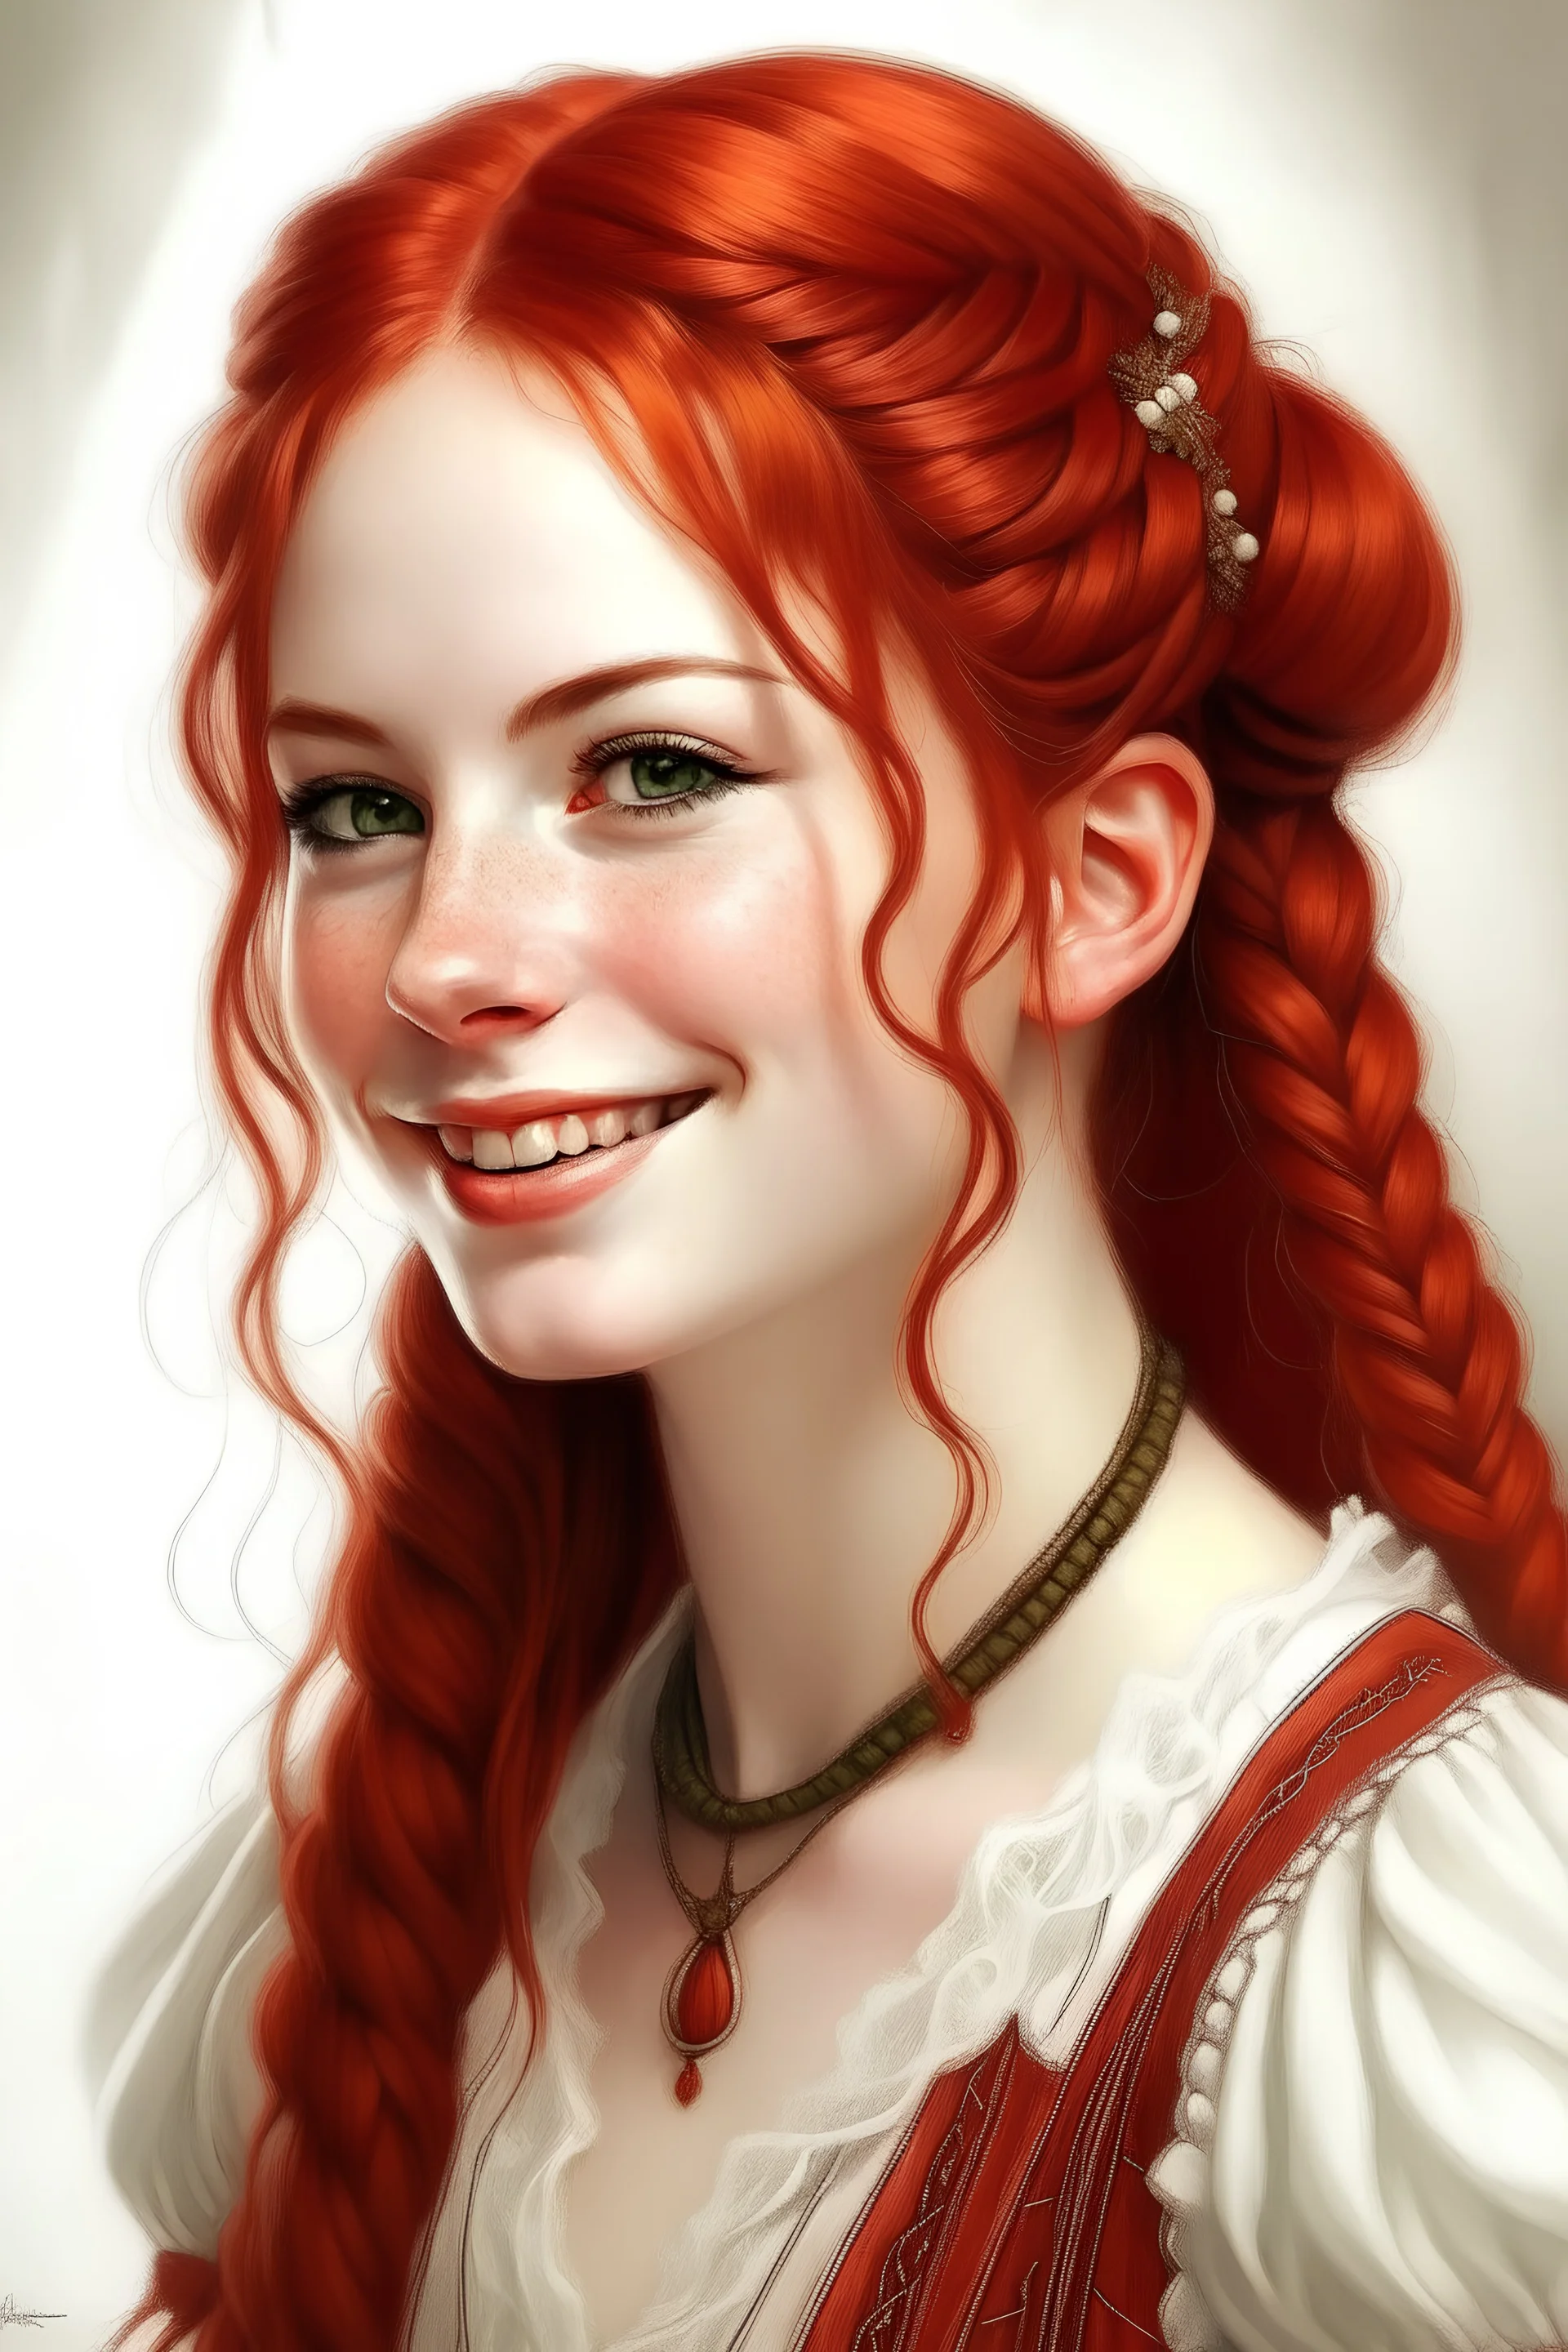 Traditional painting portrait of a young belle epoque woman. She has braided red hair. She is a magic. She is softly smiling. She is wearing a leather and lace white corset dress, with light background.